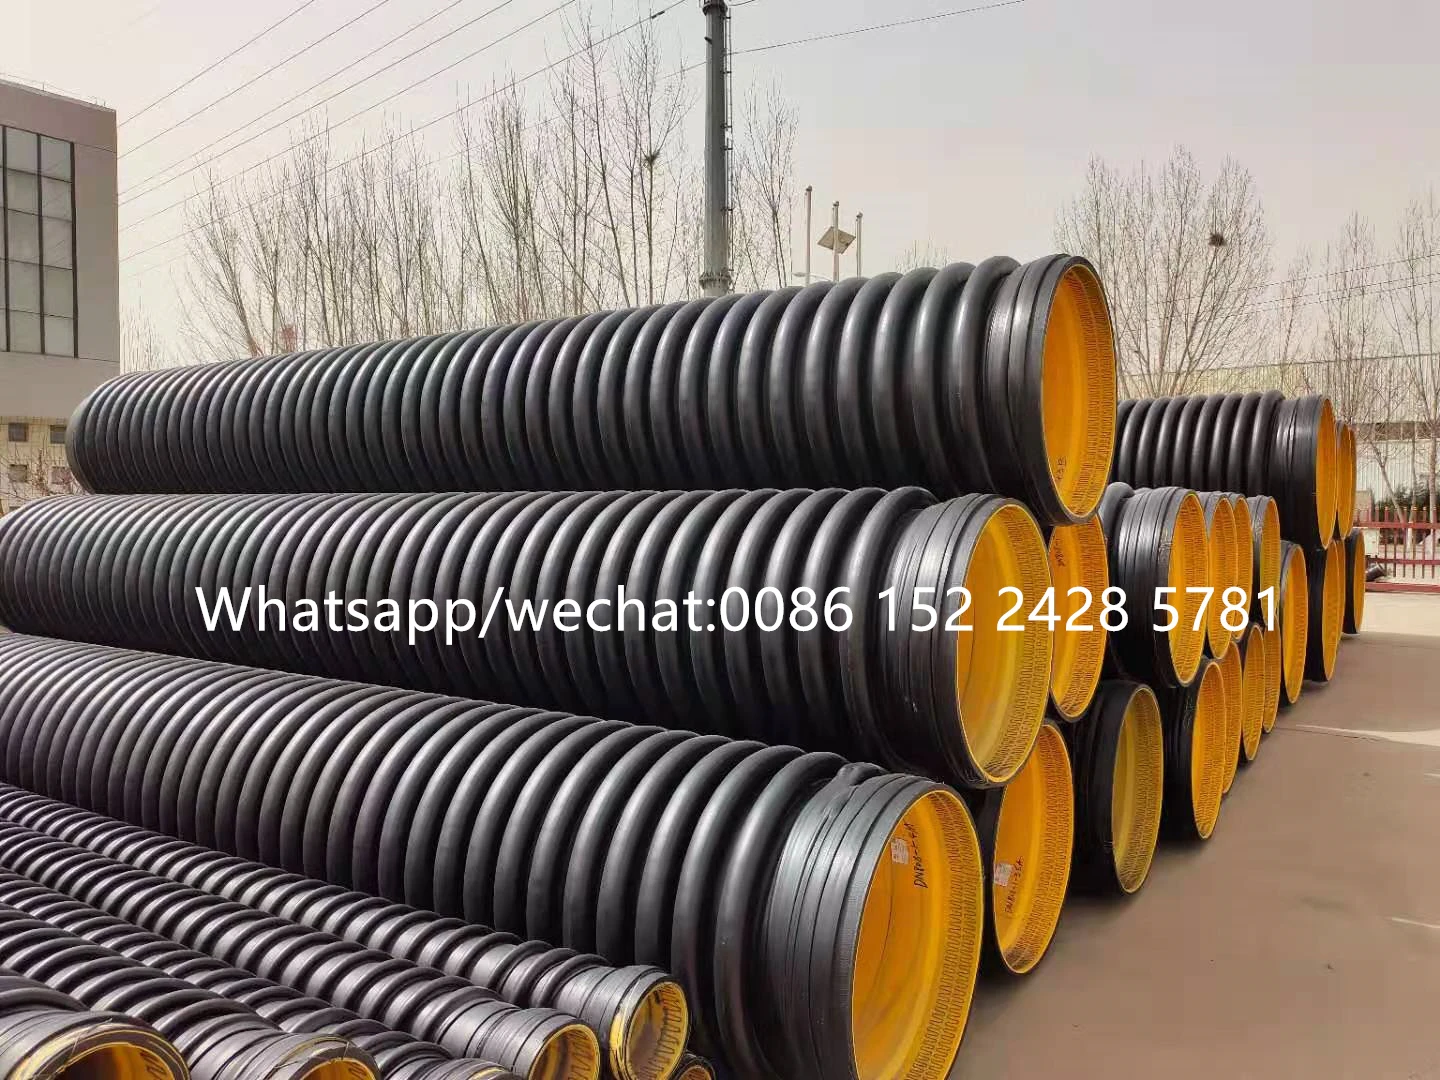 SN8 CORRUGATED PIPES HDPE 5.8M LENGTH